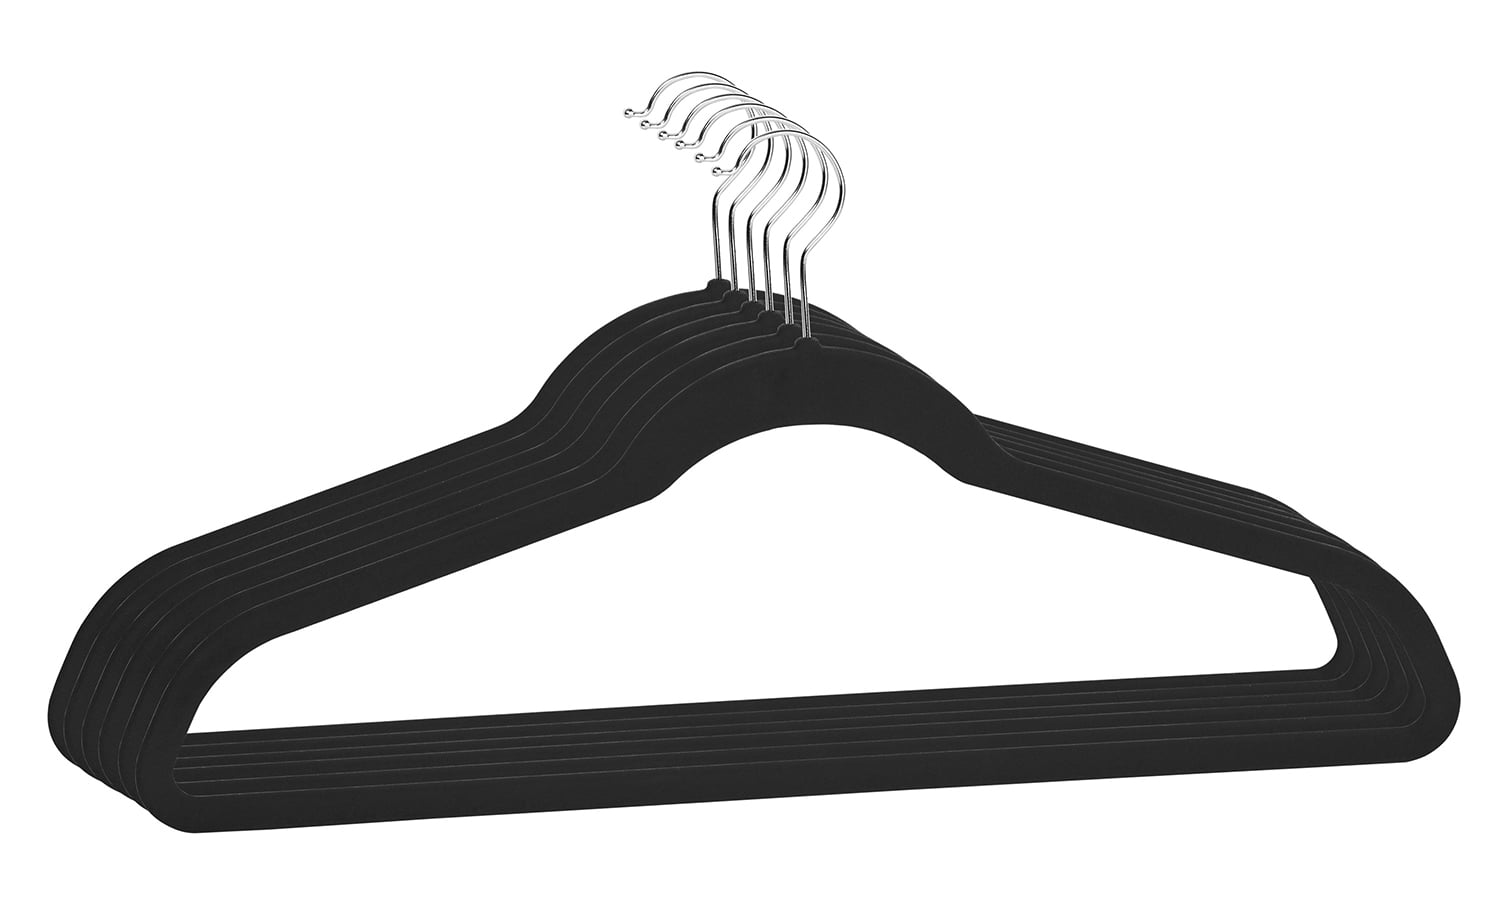 10 Extra Wide 21" Heavy Duty Aluminum Clothes Hangers for XL XXL & Larger Sizes